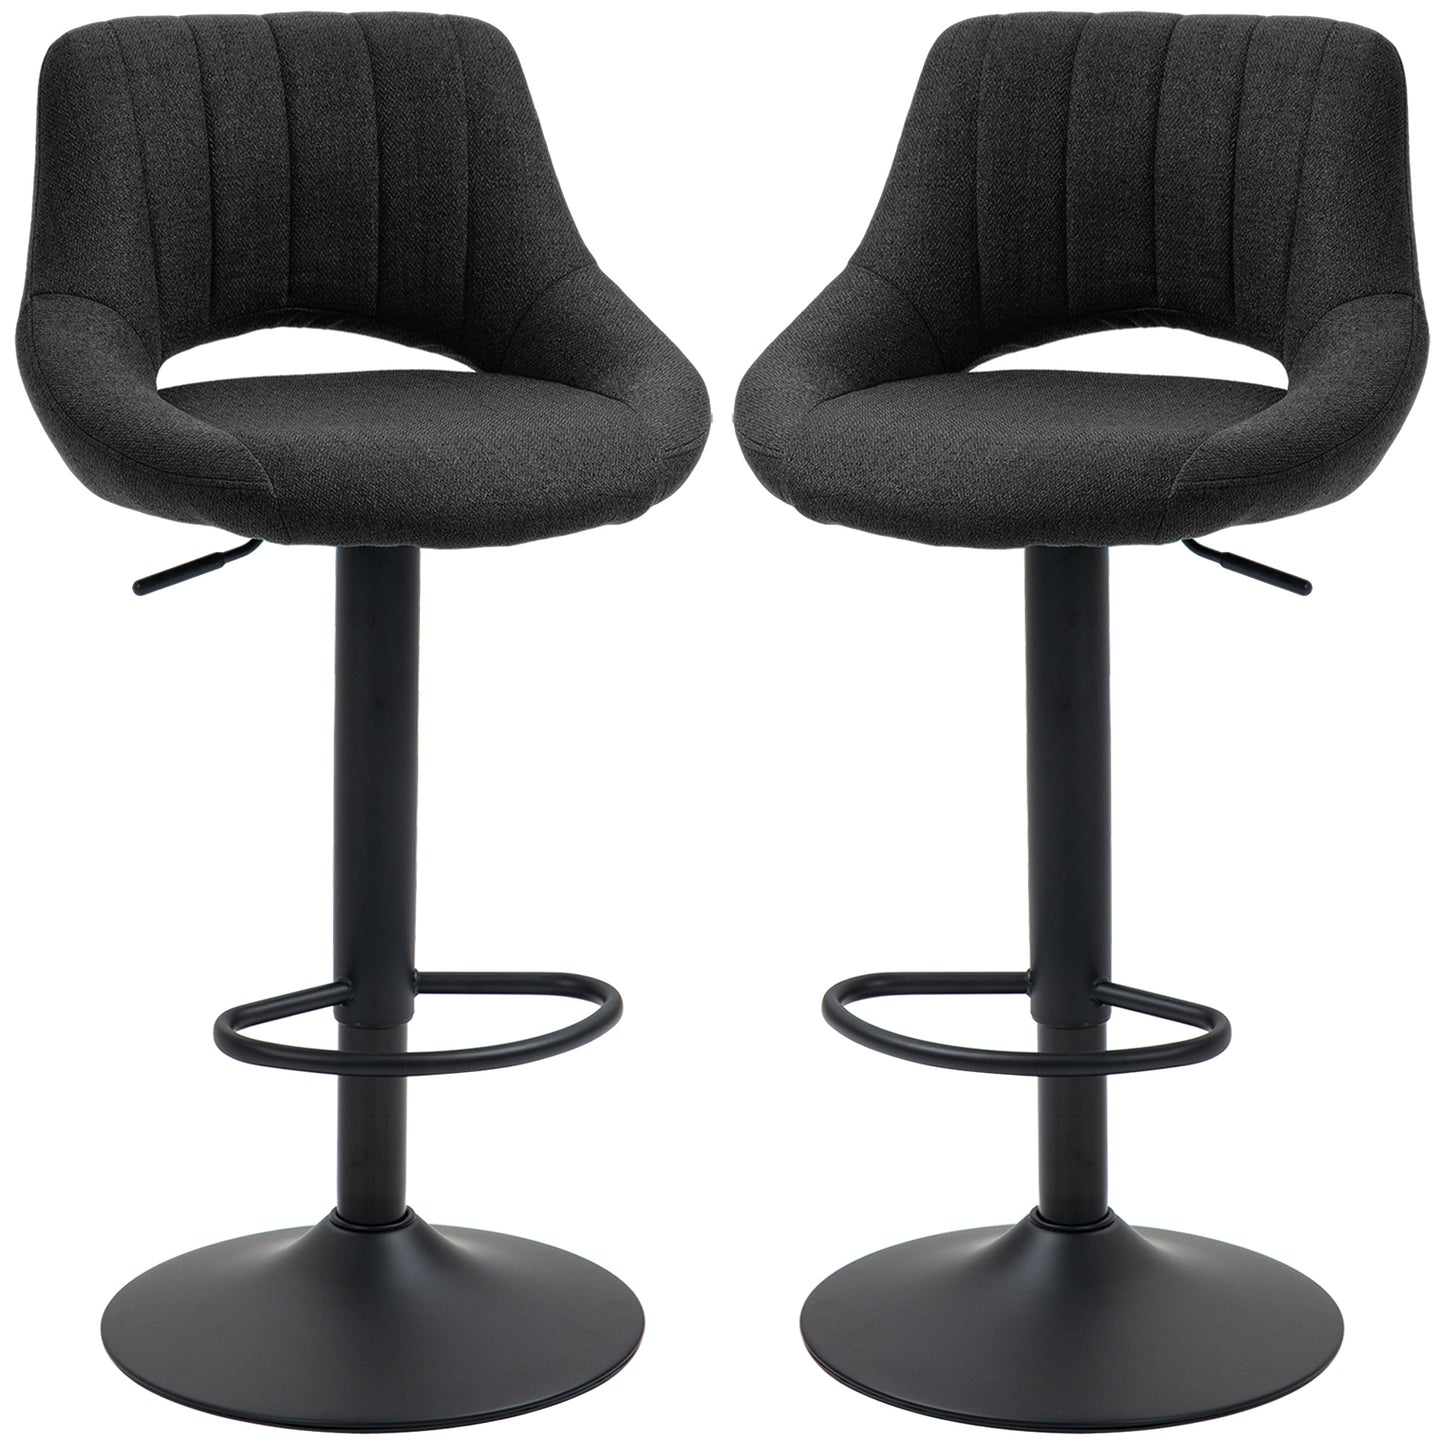 Swivel Bar Stools SET OF 2, Linen Upholstered Counter Height with Round Metal Base